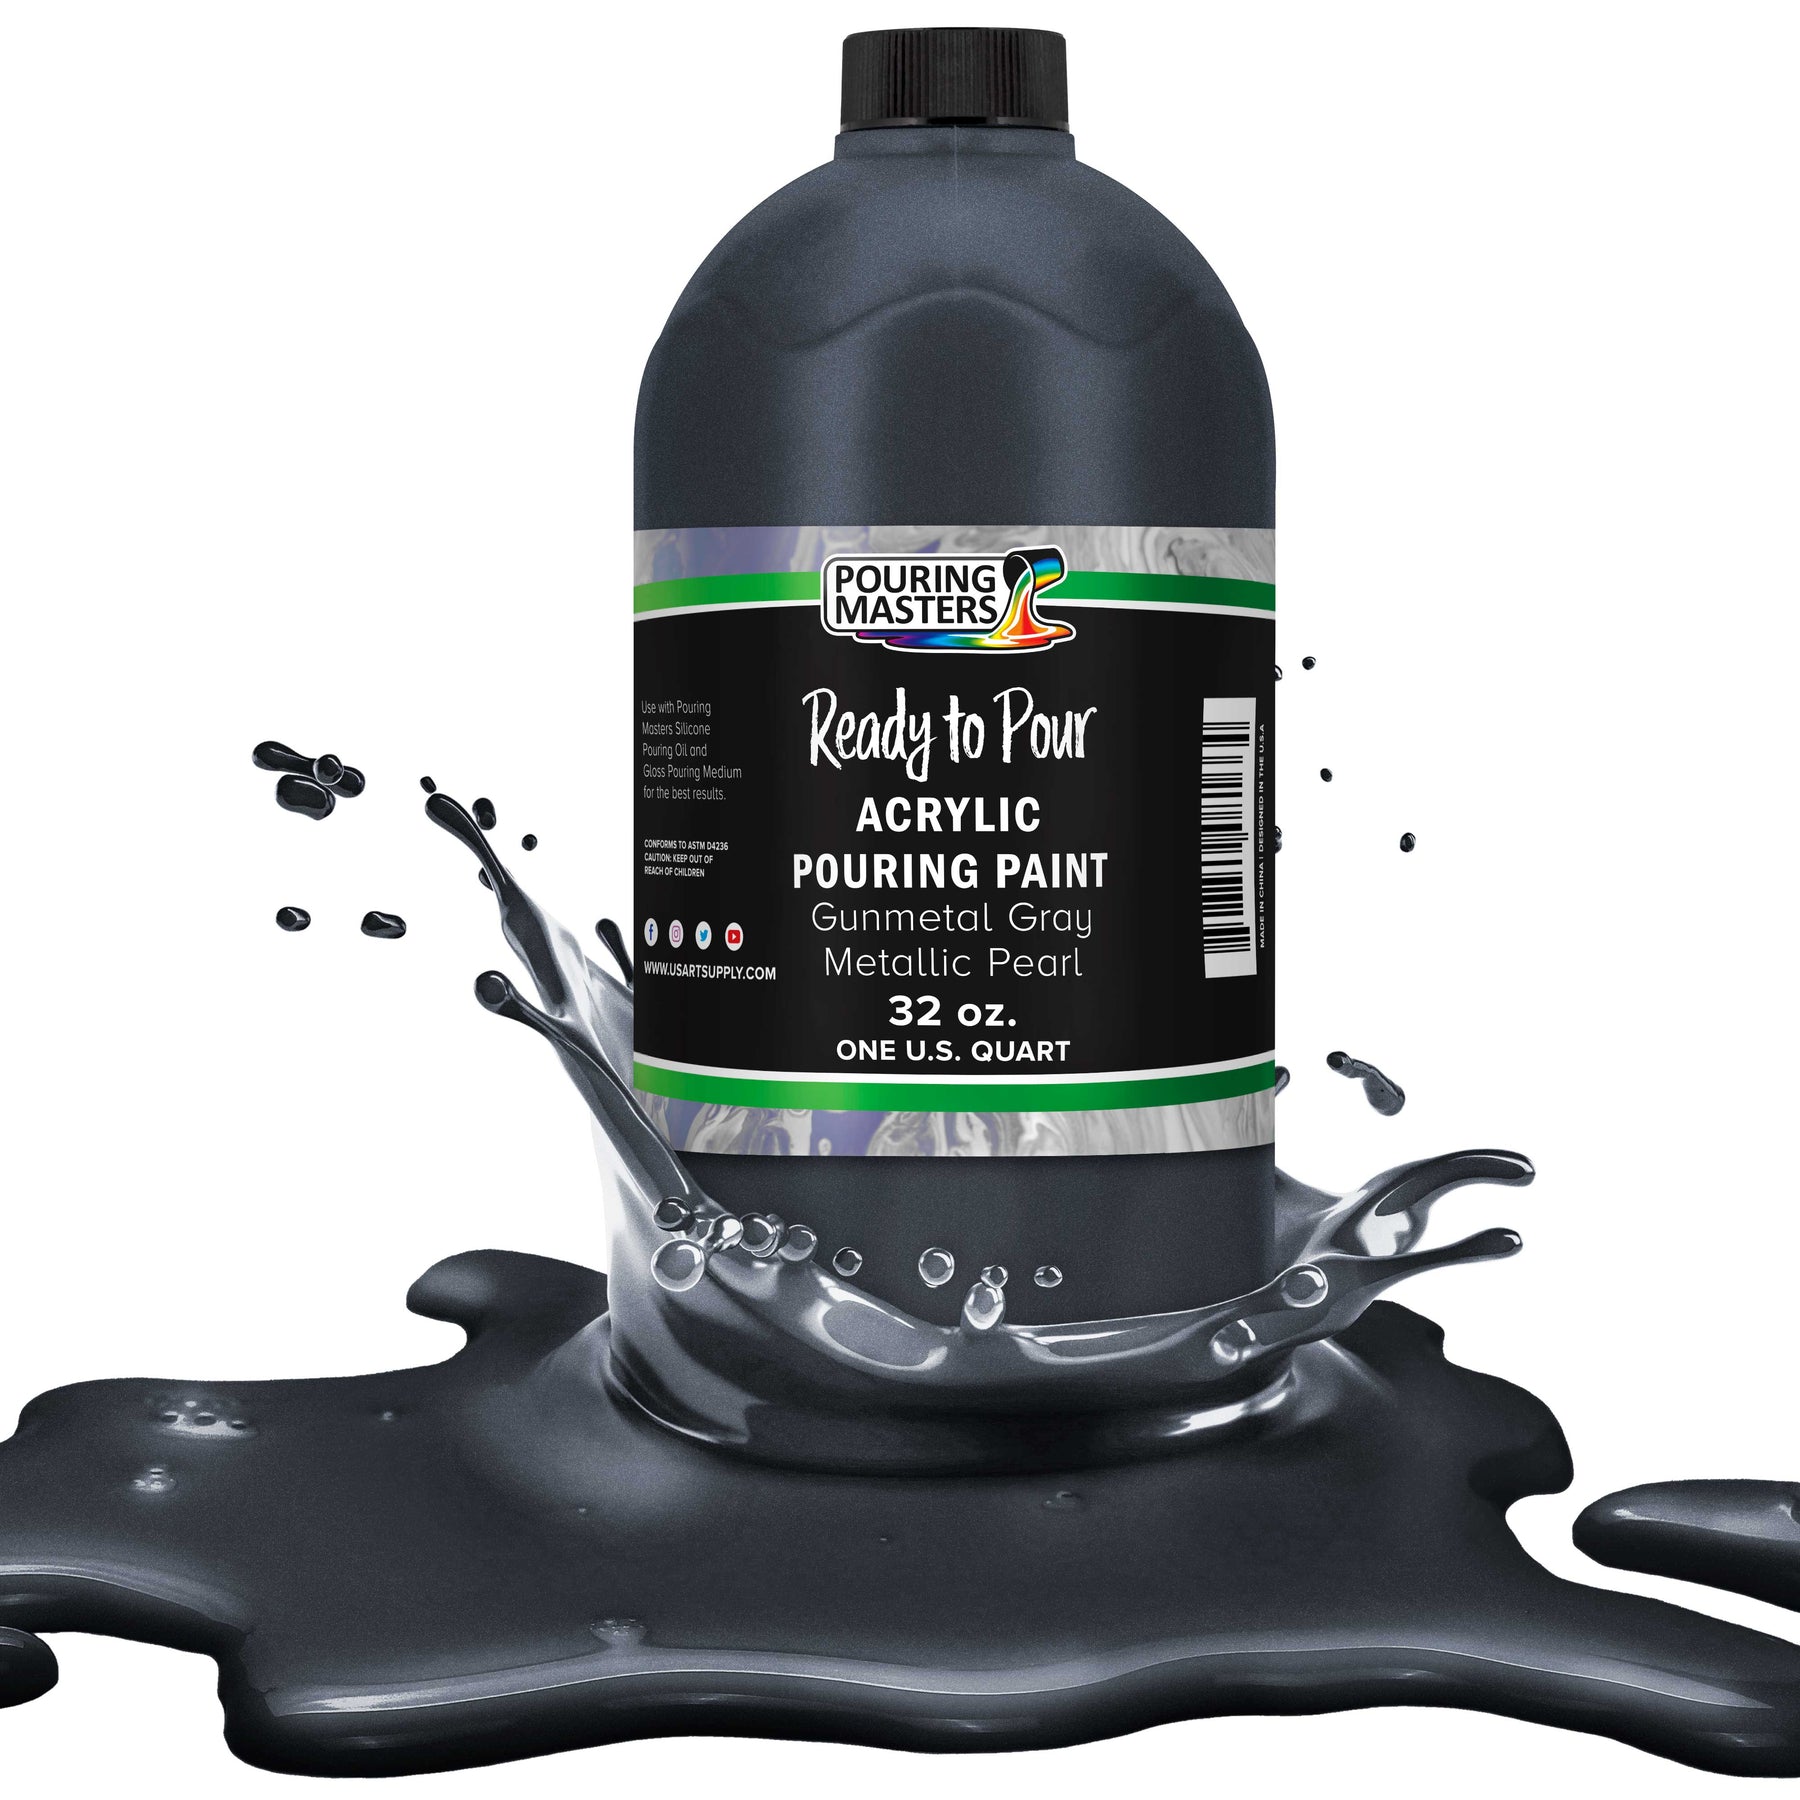 Pouring Masters Gunmetal Gray Metallic Pearl Acrylic Ready to Pour Pouring Paint Premium 32-Ounce Pre-Mixed Water-Based - for Canvas, Wood, Paper